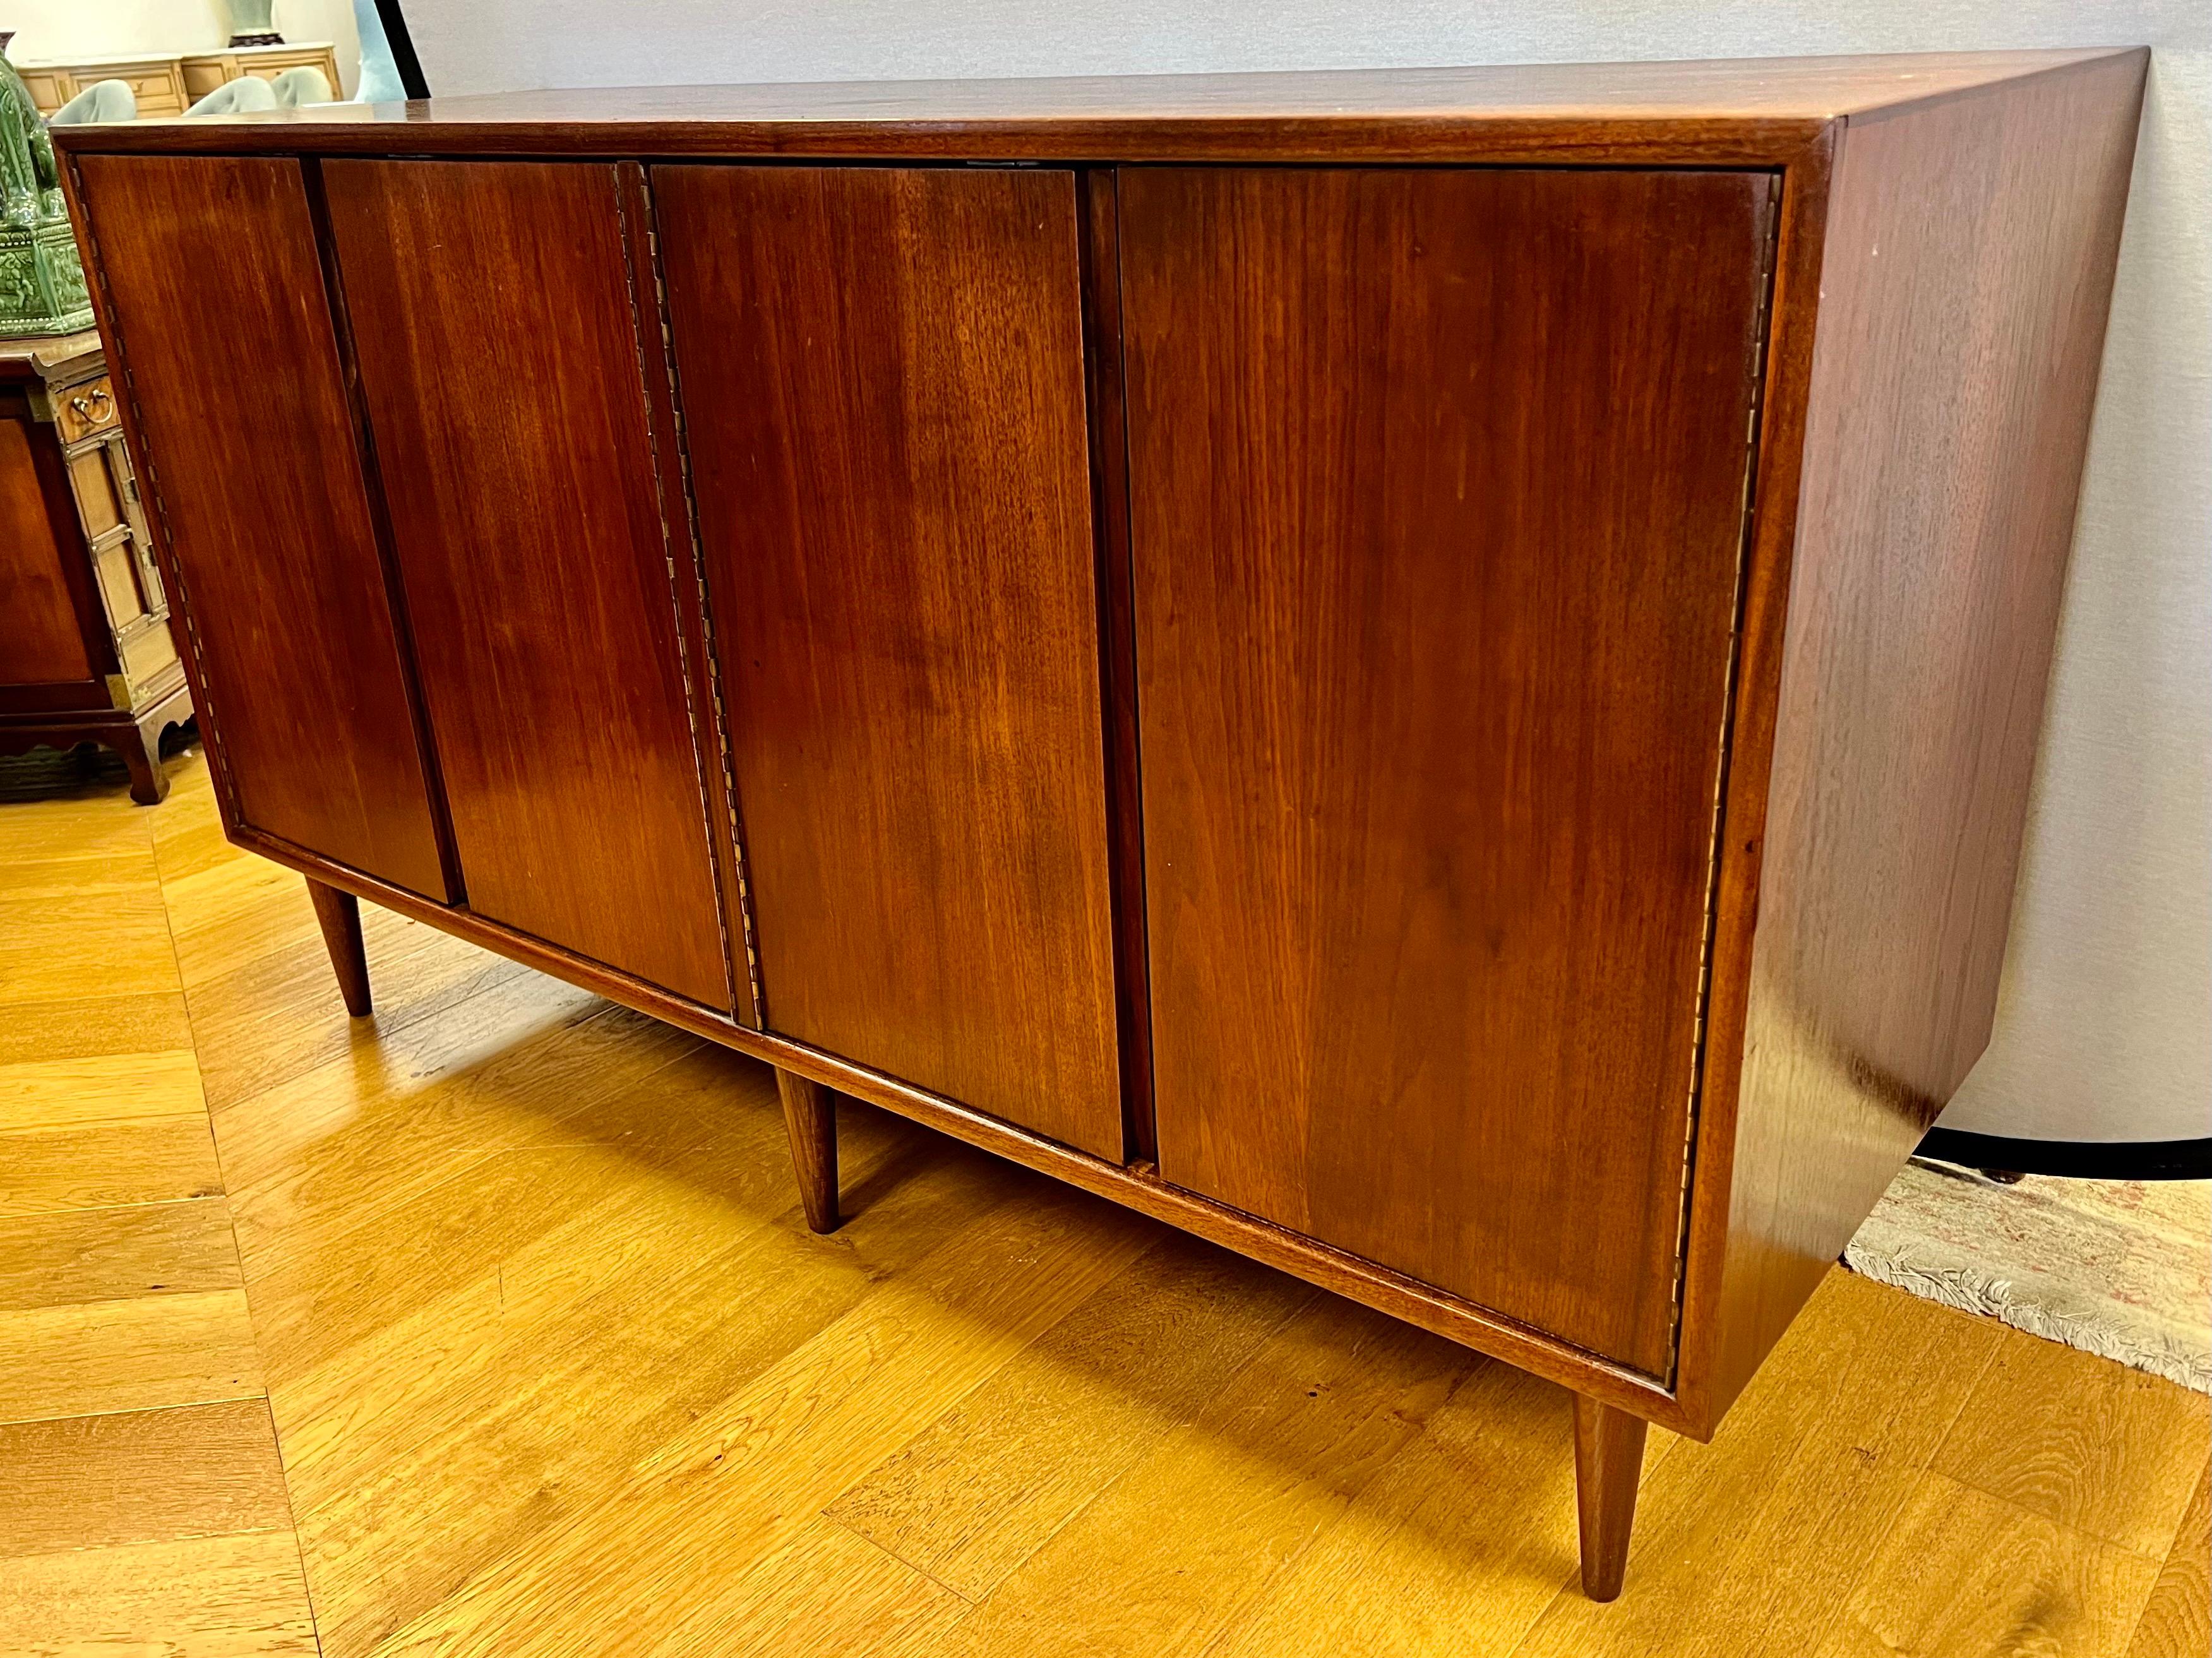 Mid century four door entertainment console has beautiful walnut graining. Left side double doors open to record cubbies and shelving for the vinyl collector! Right side door open to more storage. It has recently been polished to bring out walnut